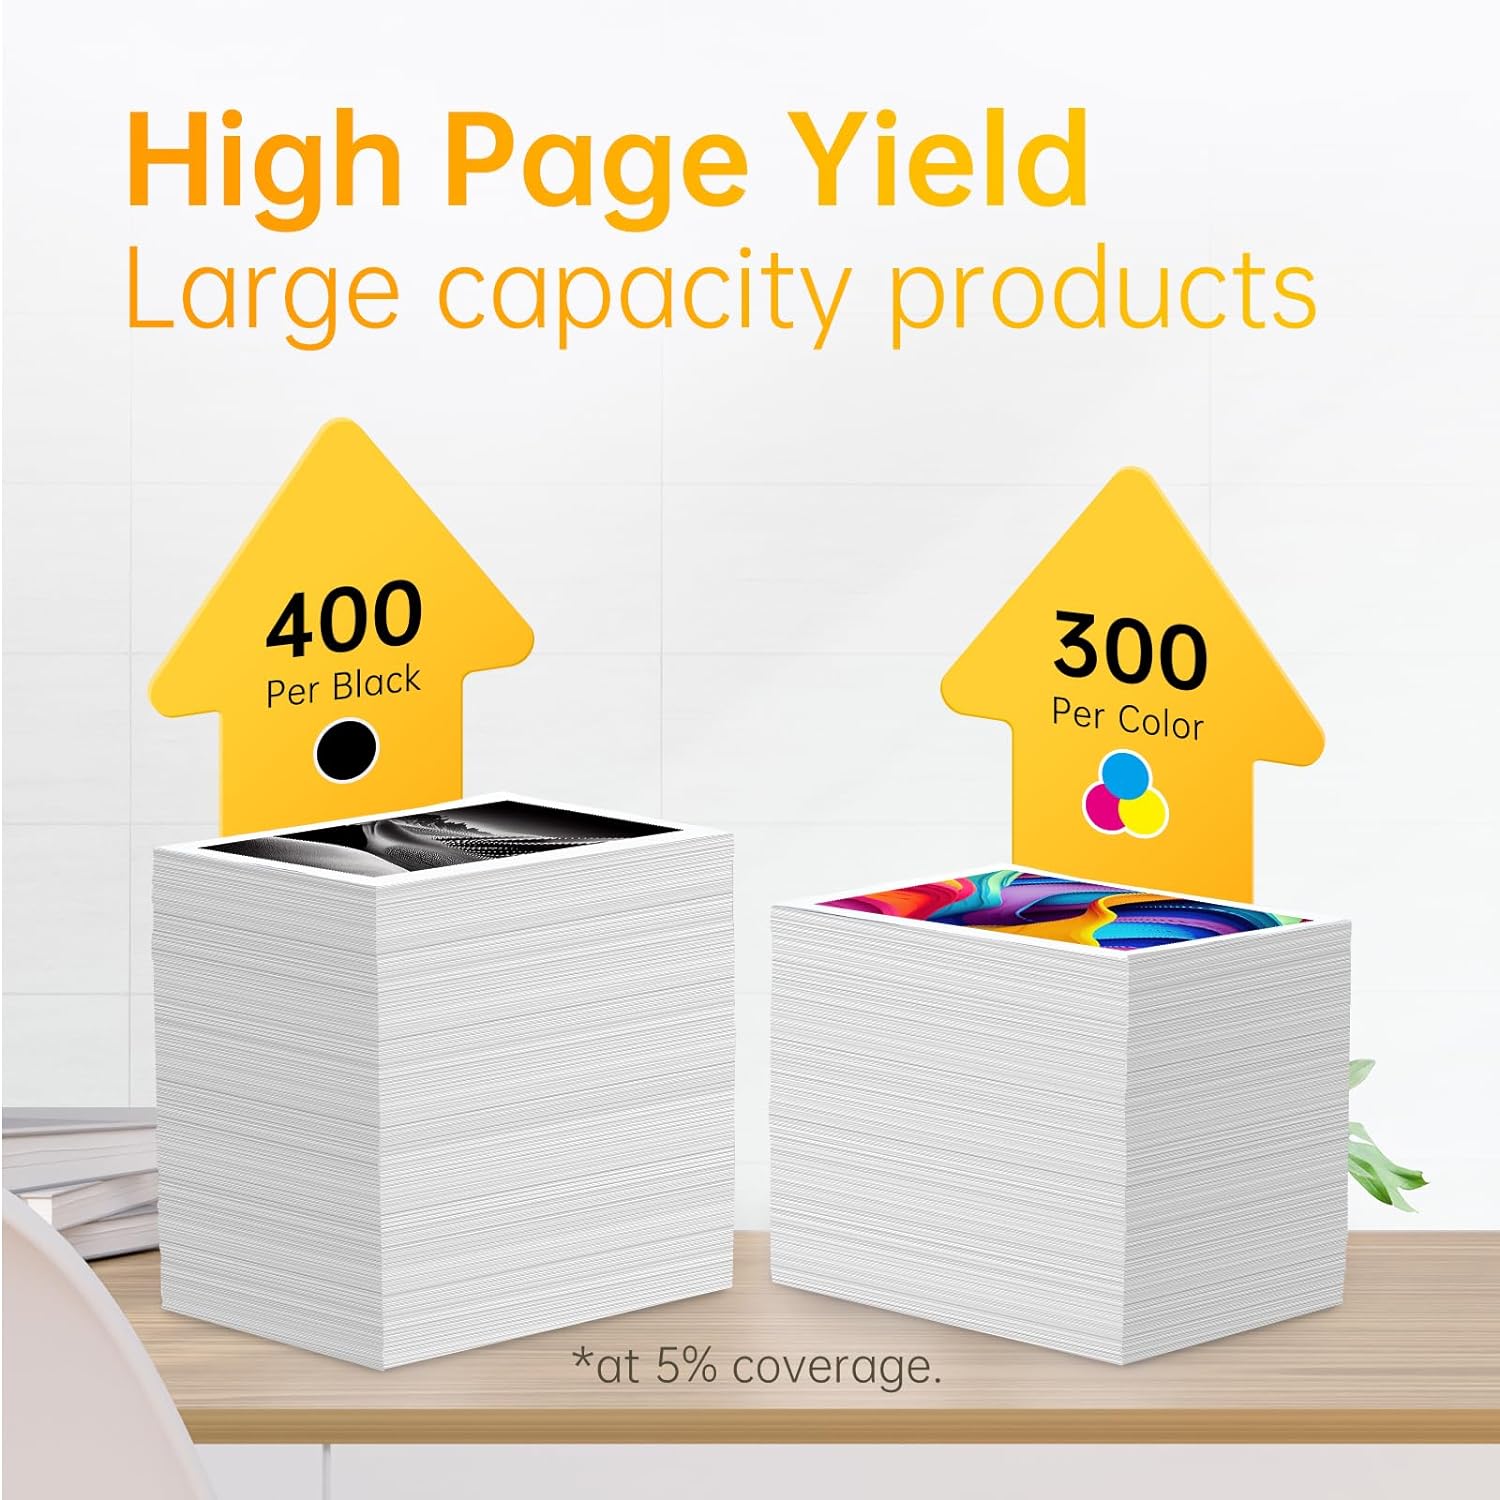 High page yield large capacity printing products featuring 400 pages per black cartridge and 300 pages per color cartridge at 5% coverage, displayed above stacks of paper